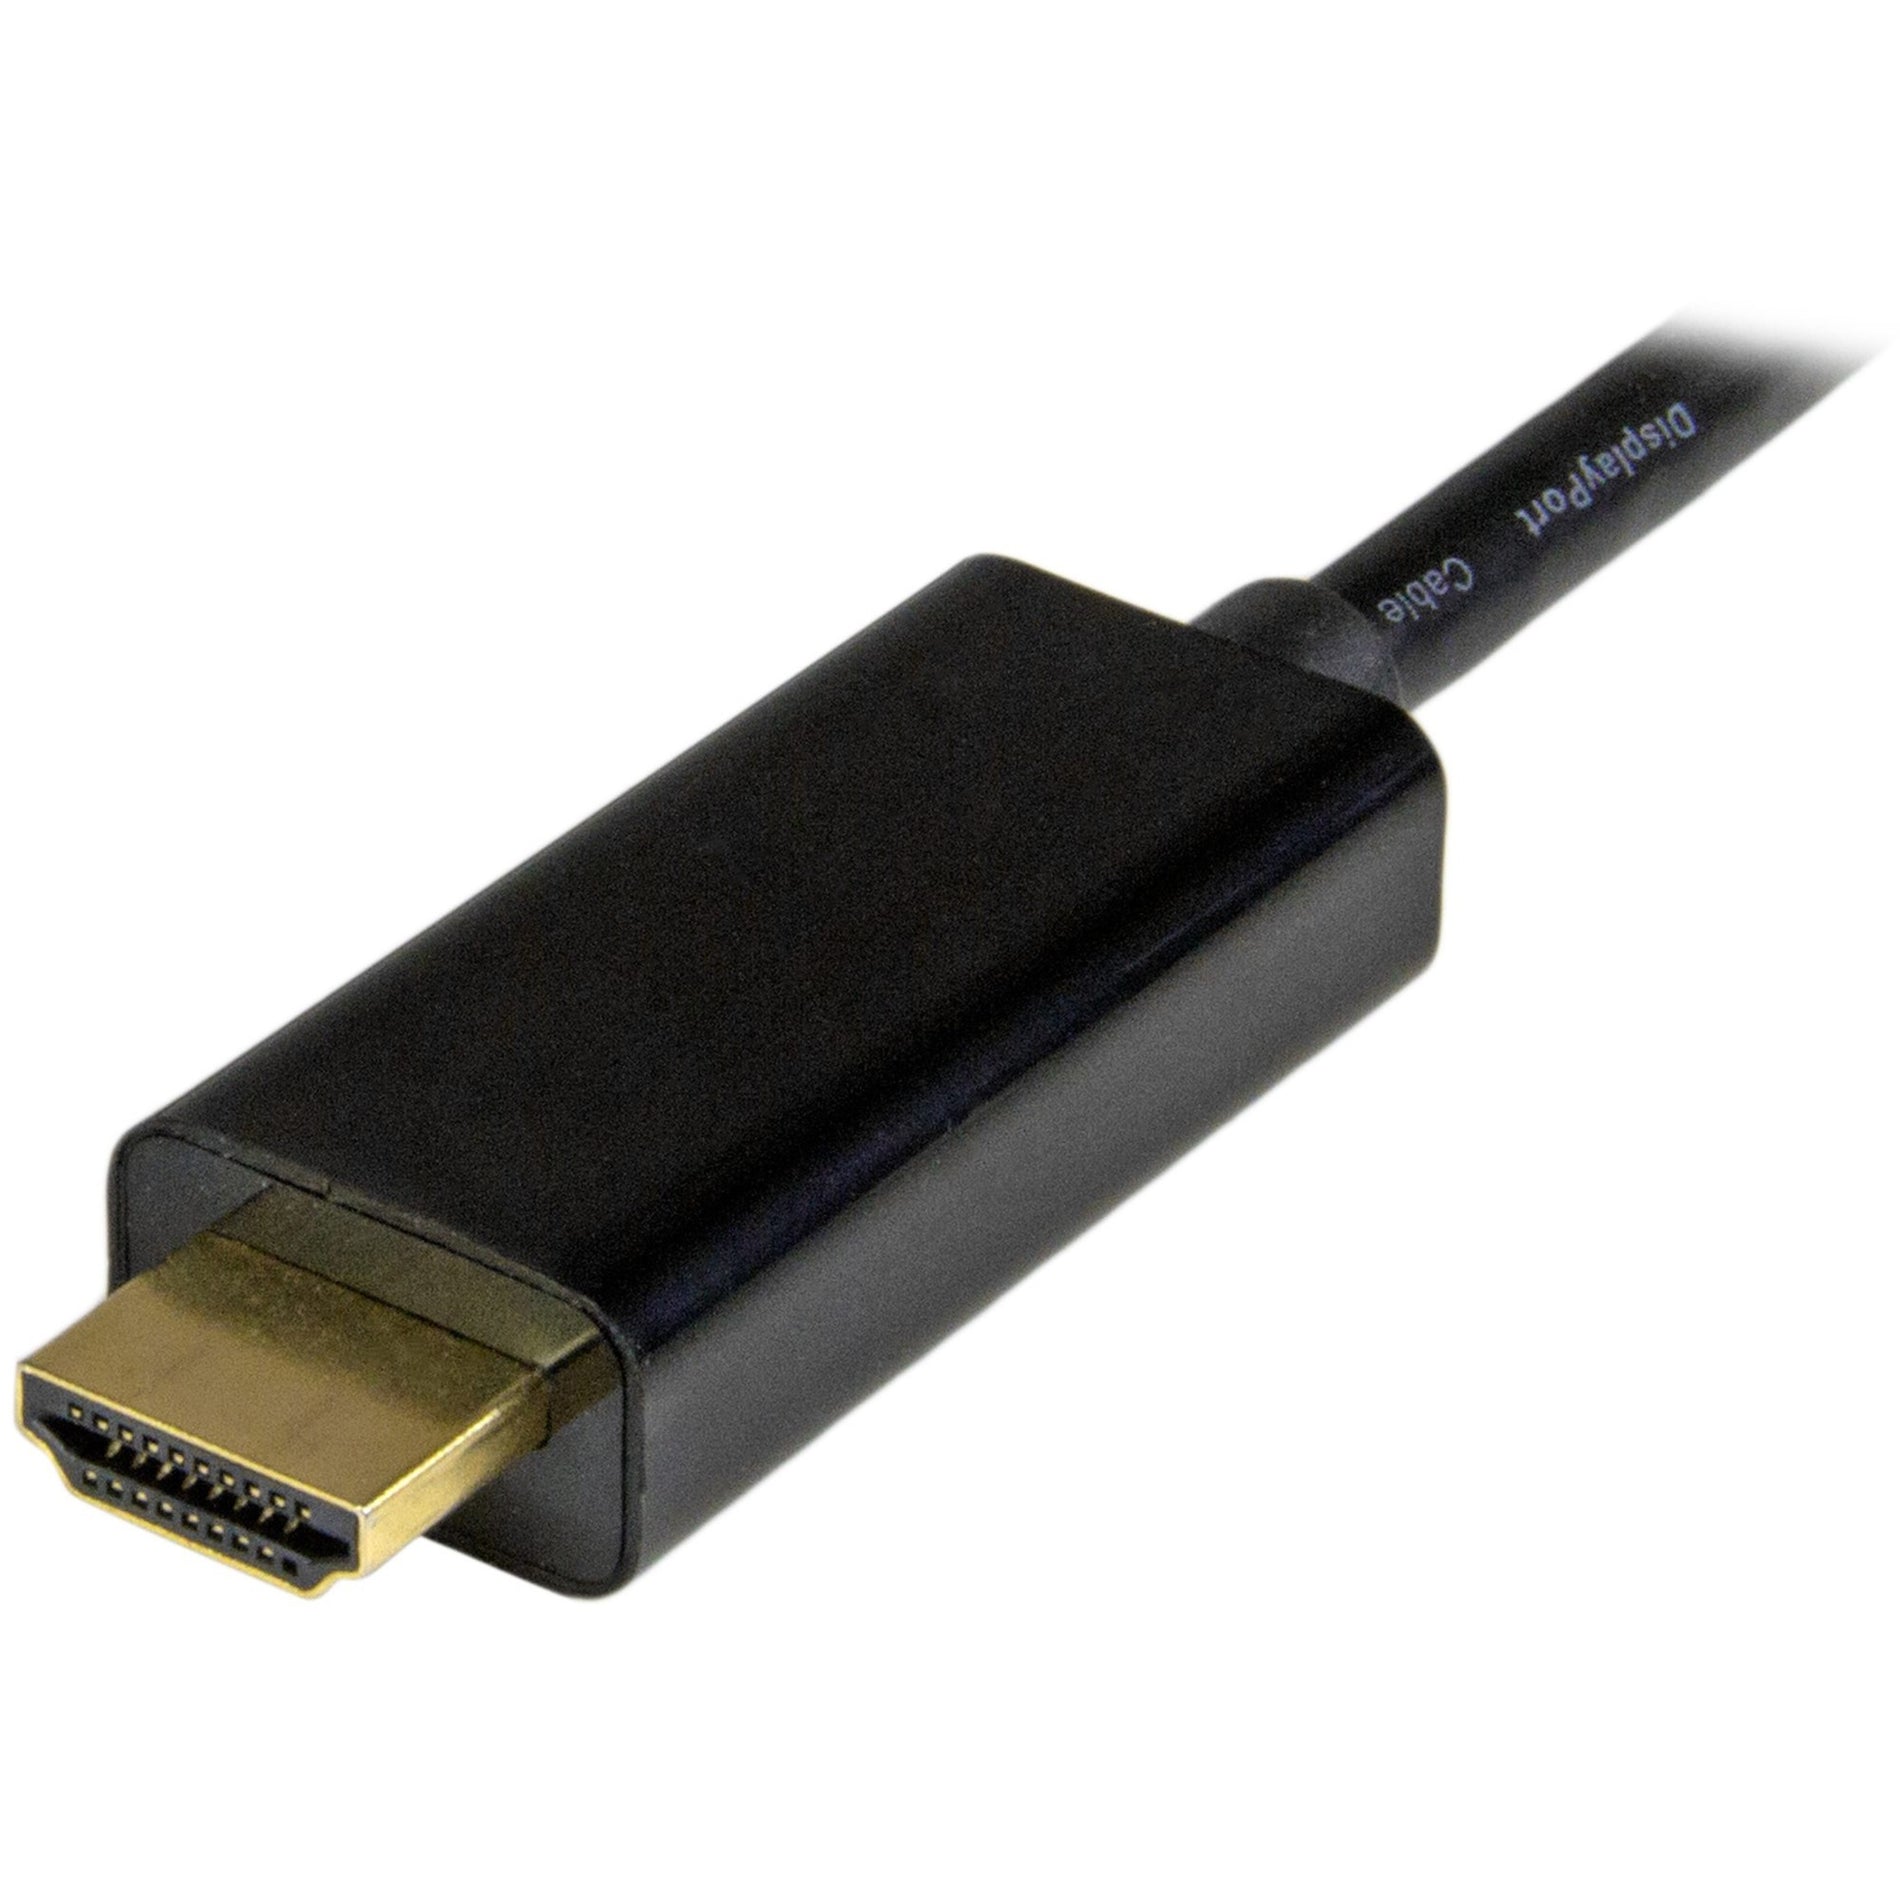 StarTech.com MDP2HDMM5MB Mini DisplayPort to HDMI Adapter Cable - 5 m (15 ft.), Ultra HD 4K 30Hz